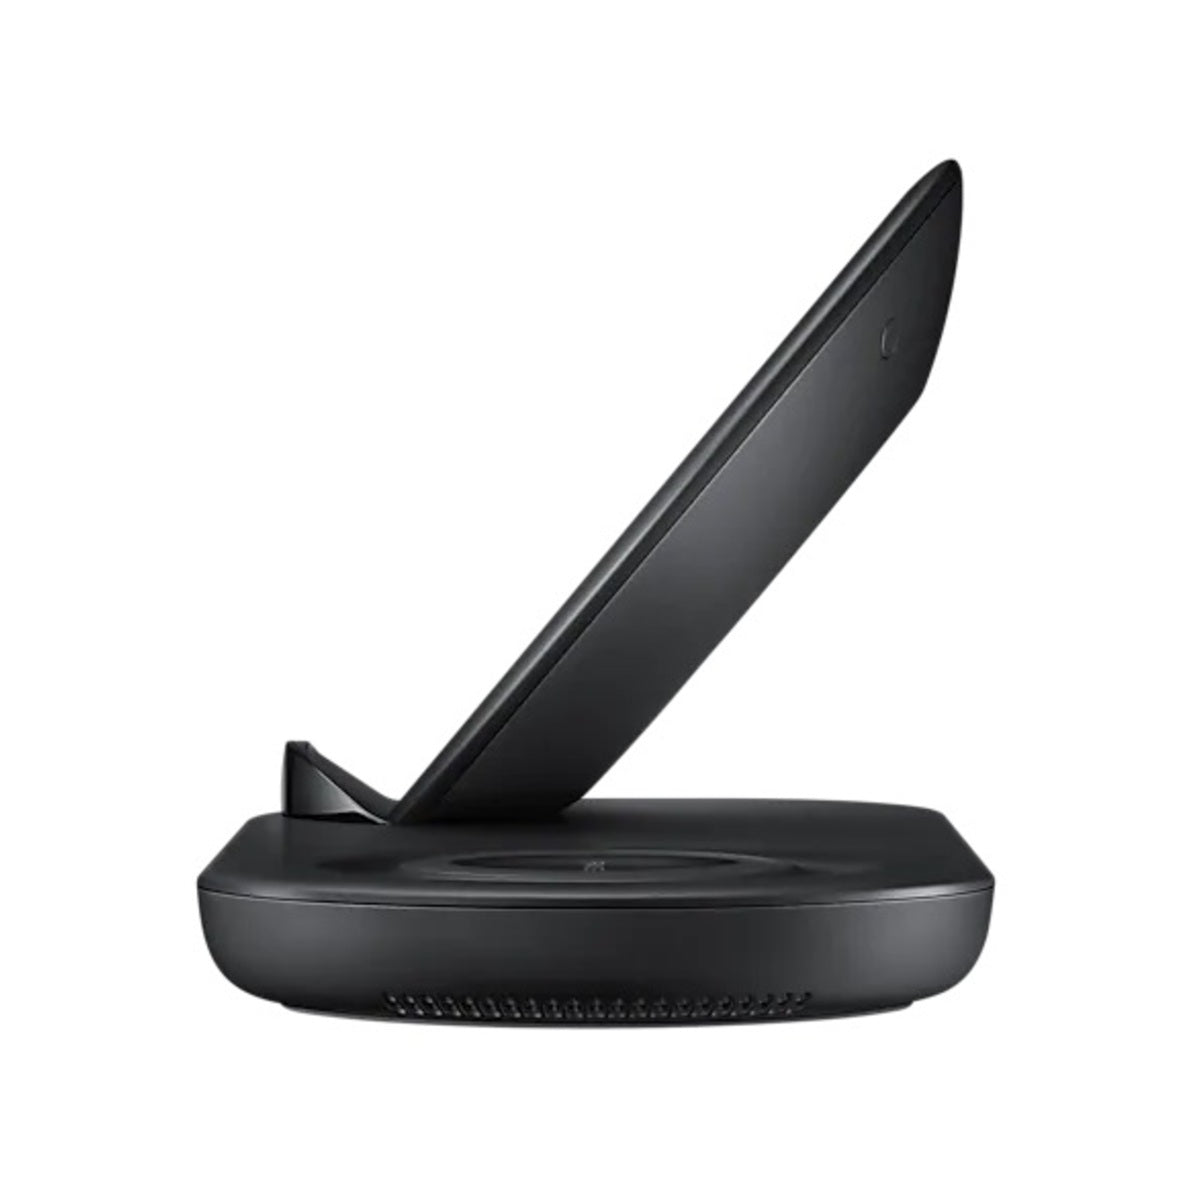 Samsung Dual Wireless Charger.